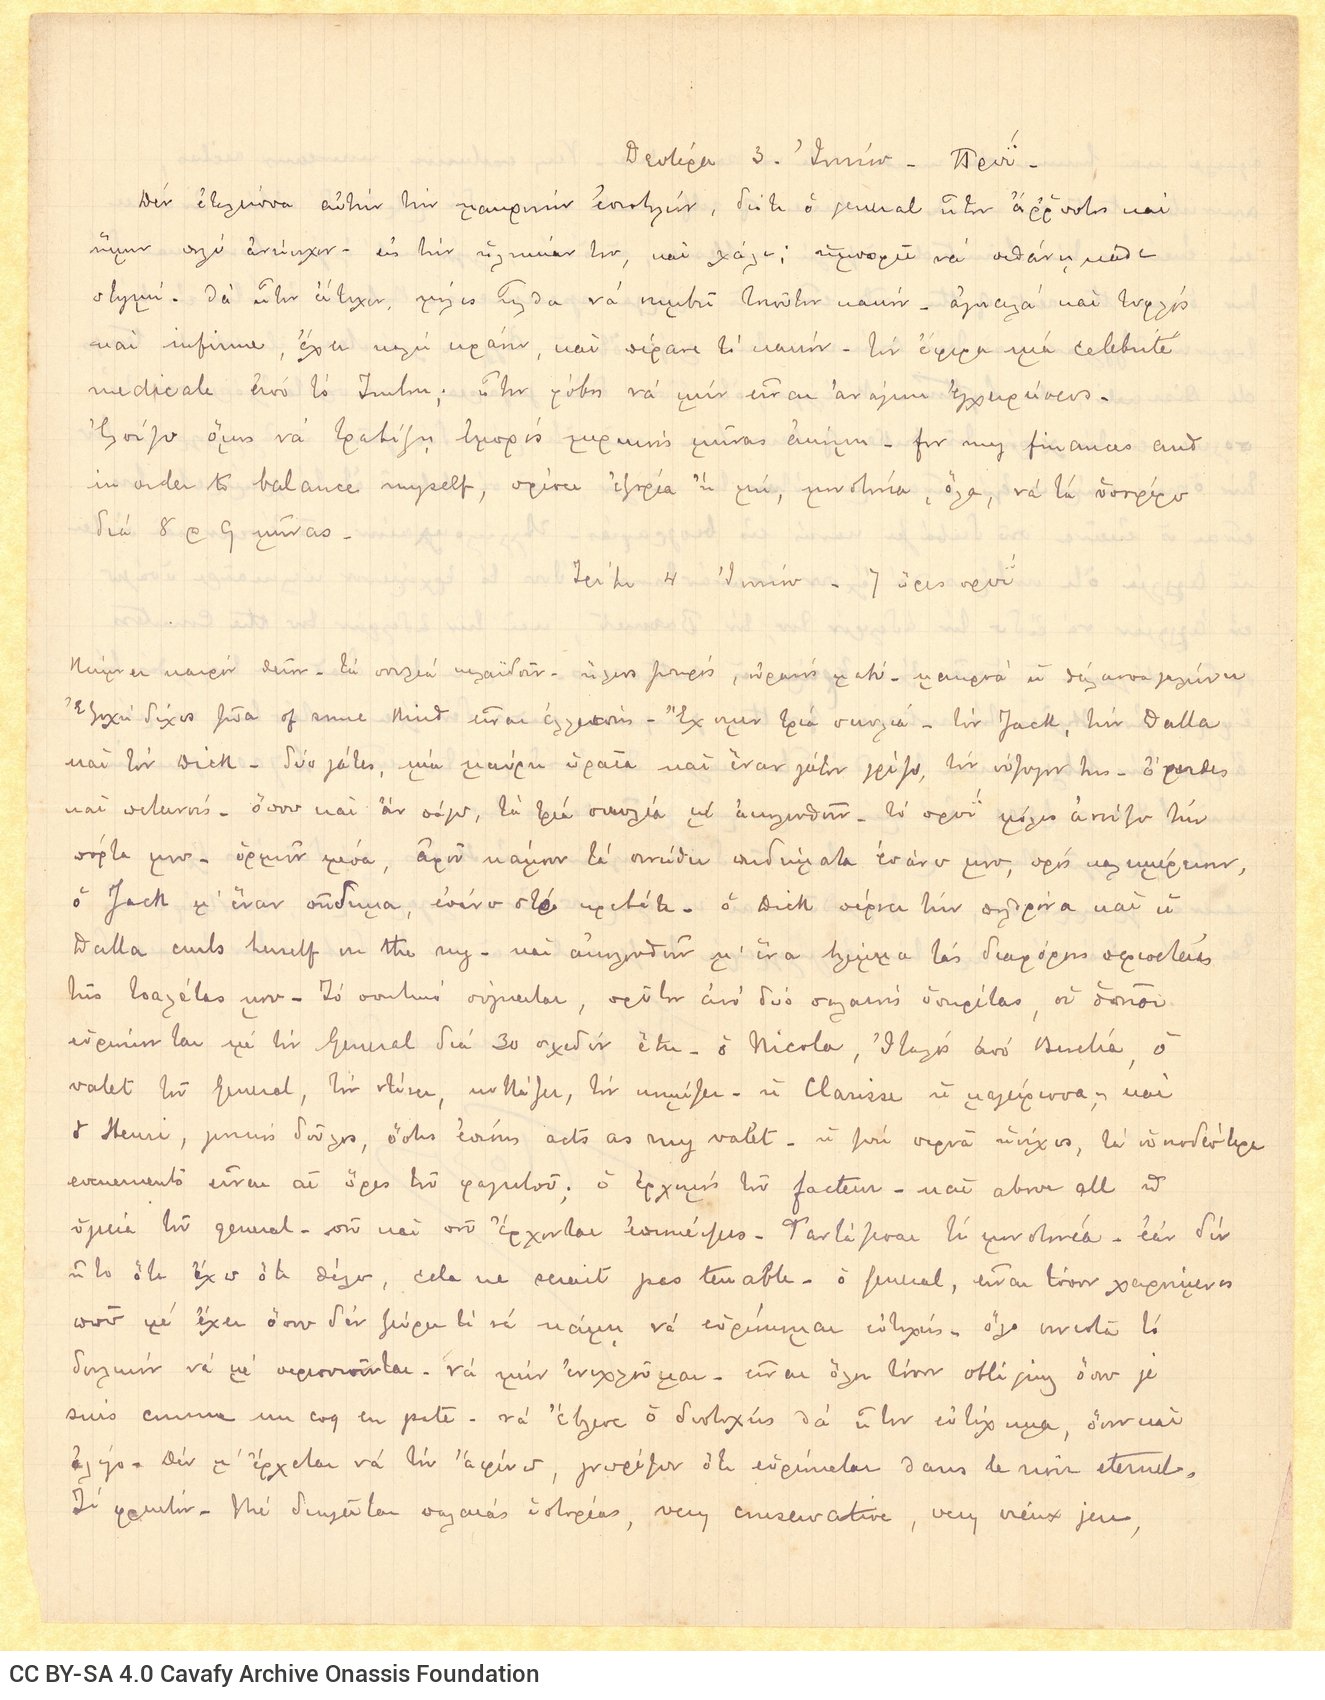 Handwritten diary-type letter by Paul Cavafy to C. P. Cavafy from Hyères, France, on both sides of two sheets. The letter is